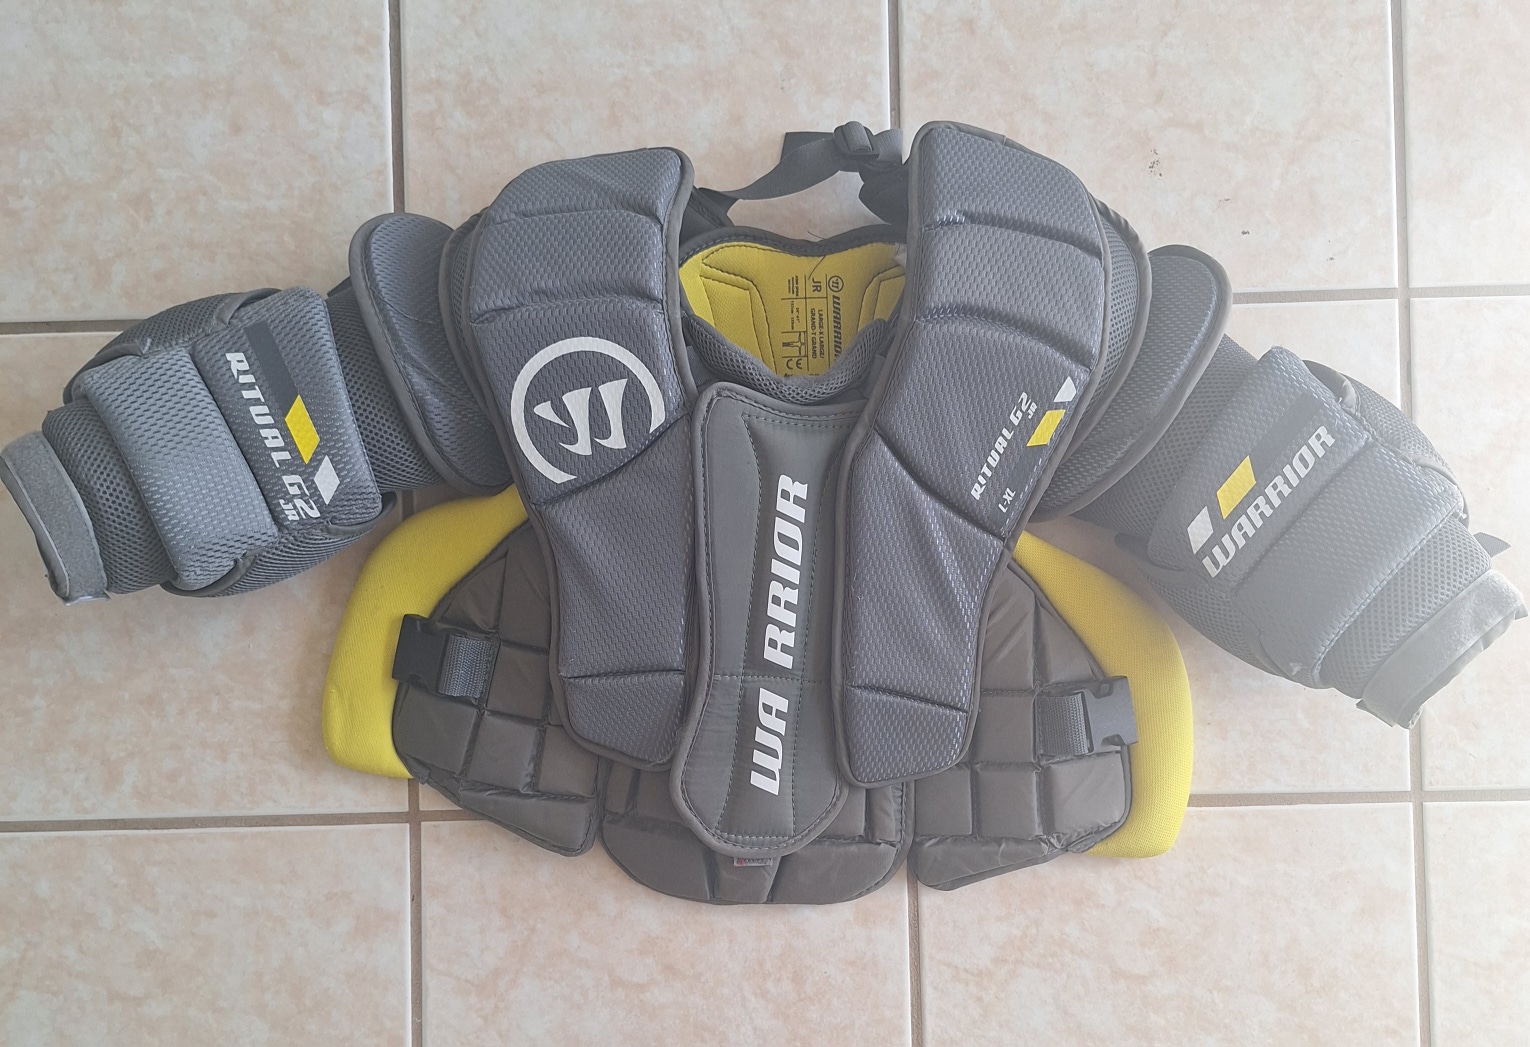 New Large Warrior Ritual G2 Goalie Chest Protector